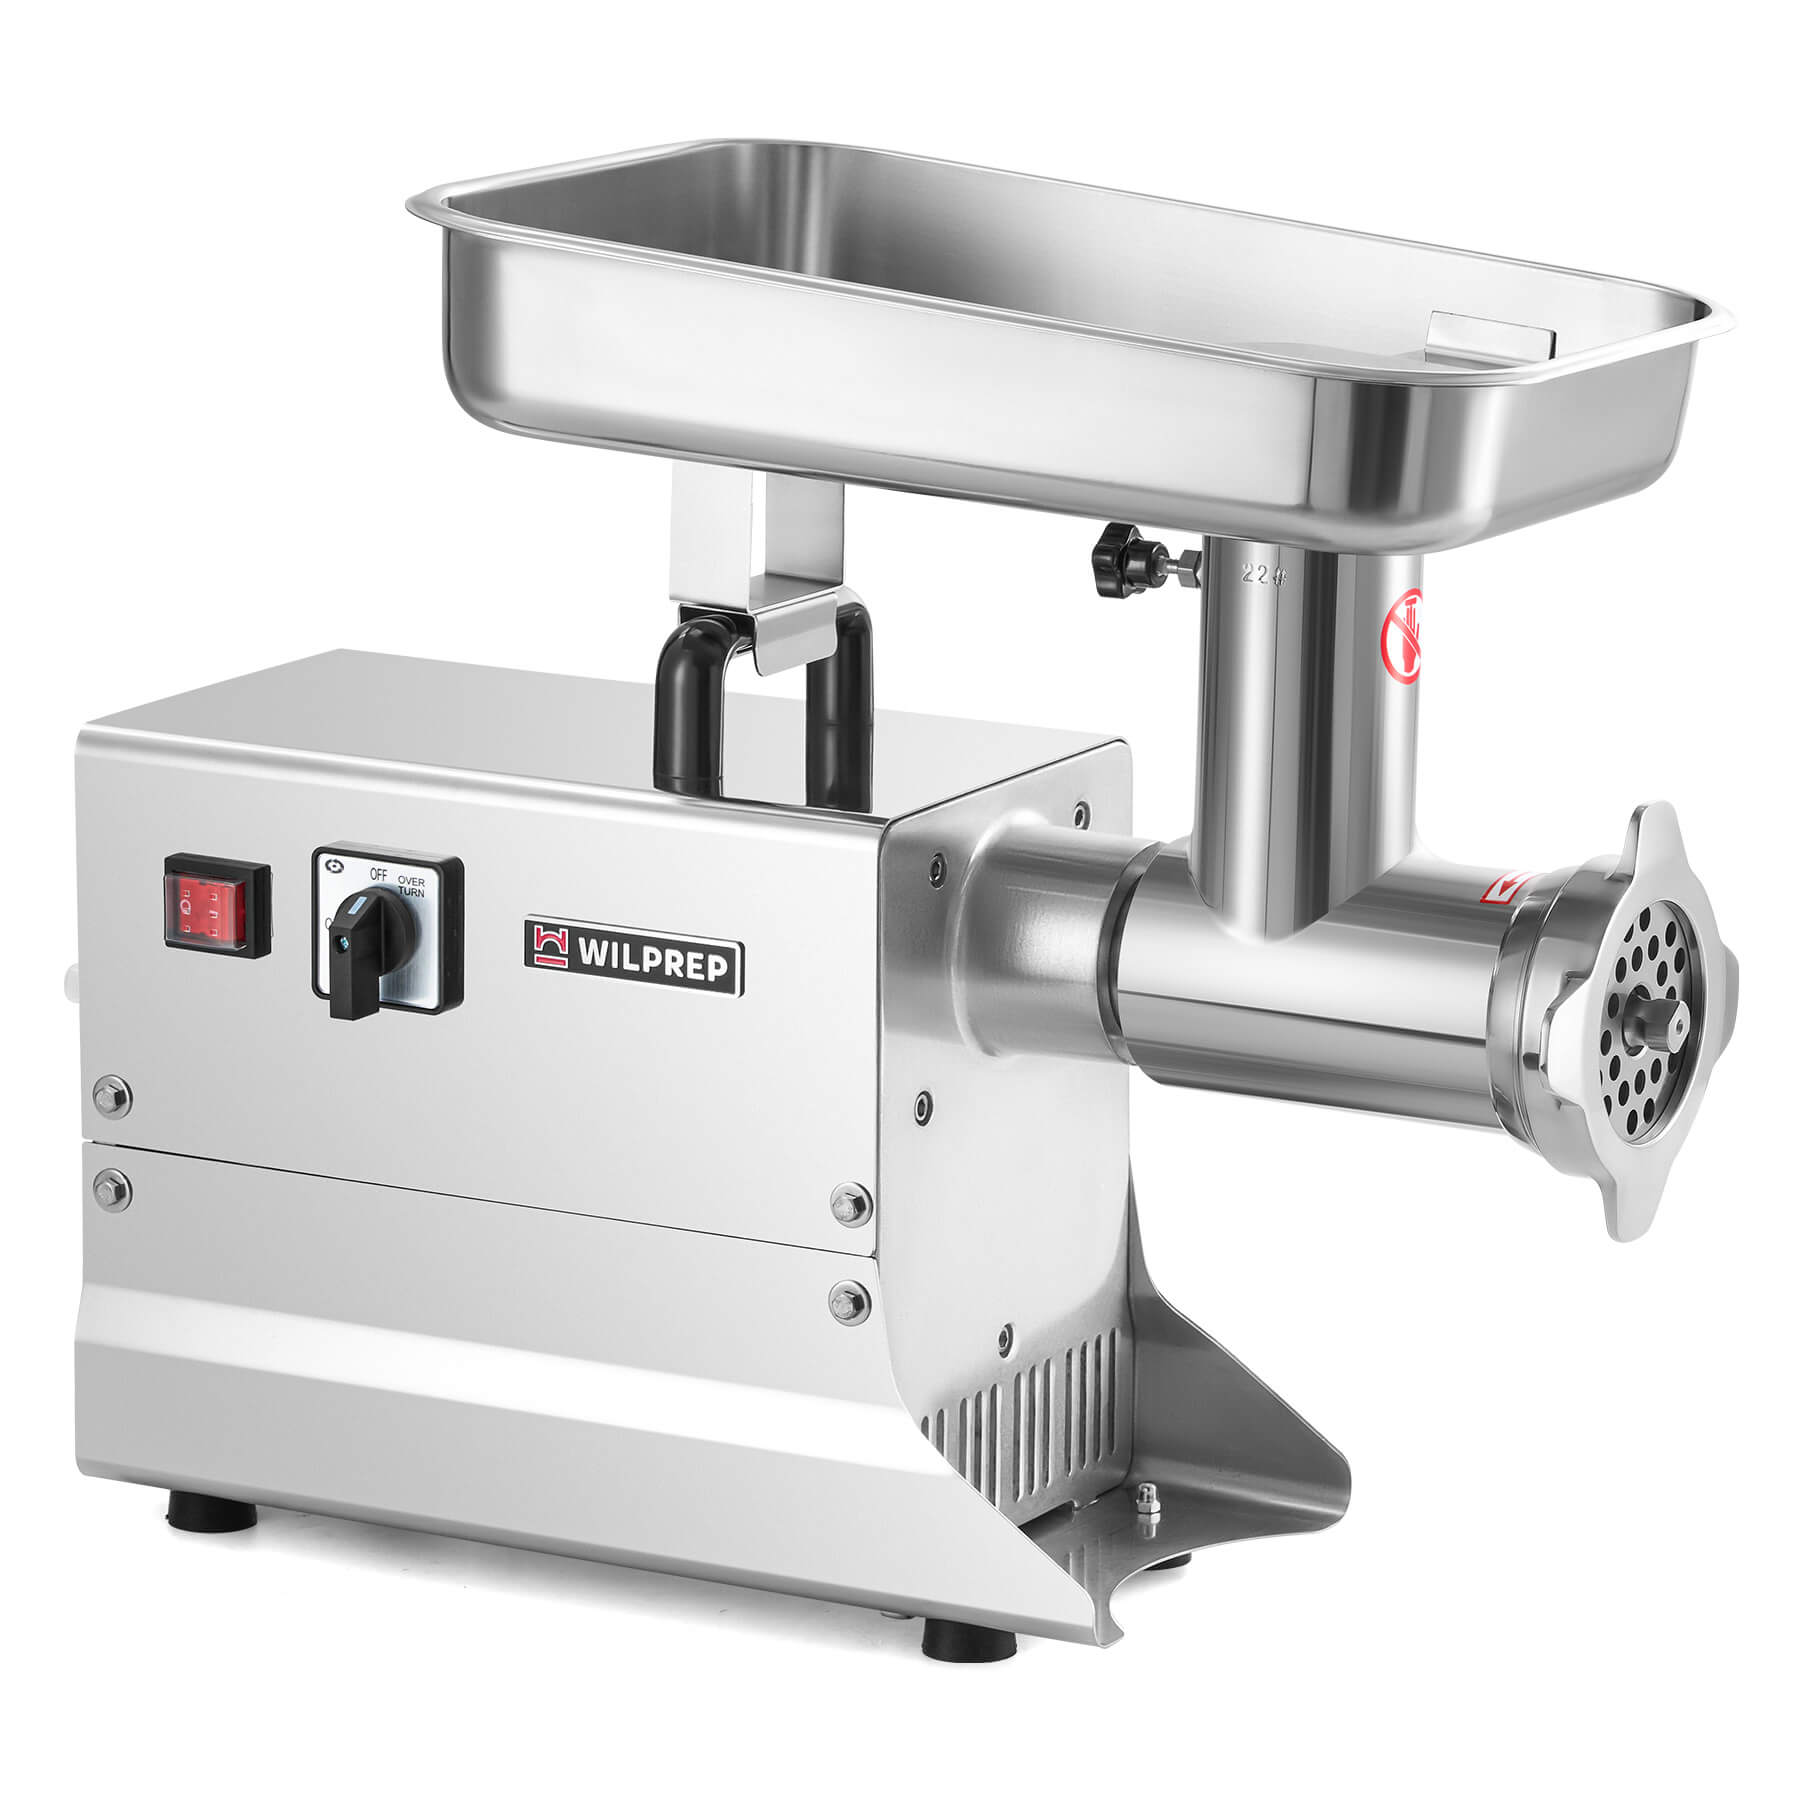 1100W Electric Meat Grinder with Reverse Function ETL Approved-110V,1 1/2hp